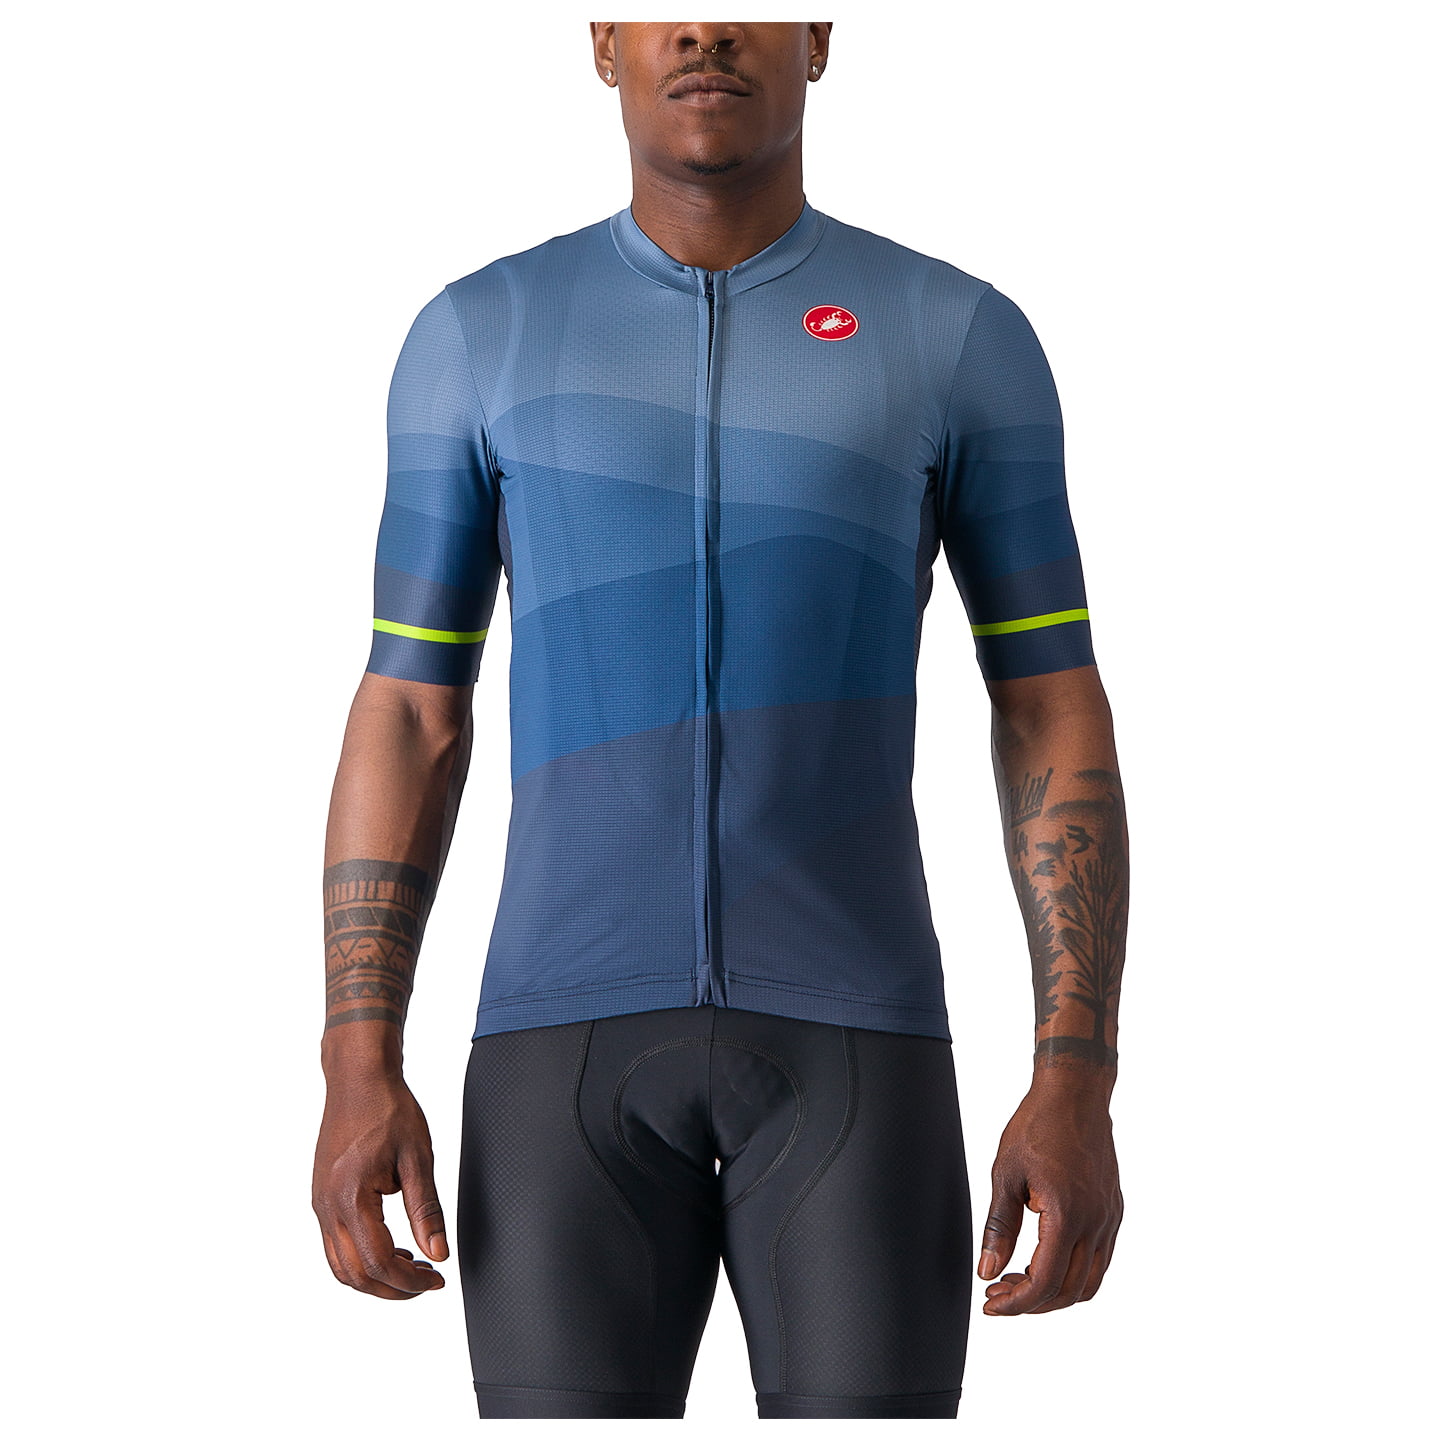 CASTELLI Orizzonte Short Sleeve Jersey, for men, size 3XL, Cycling jersey, Cycle clothing